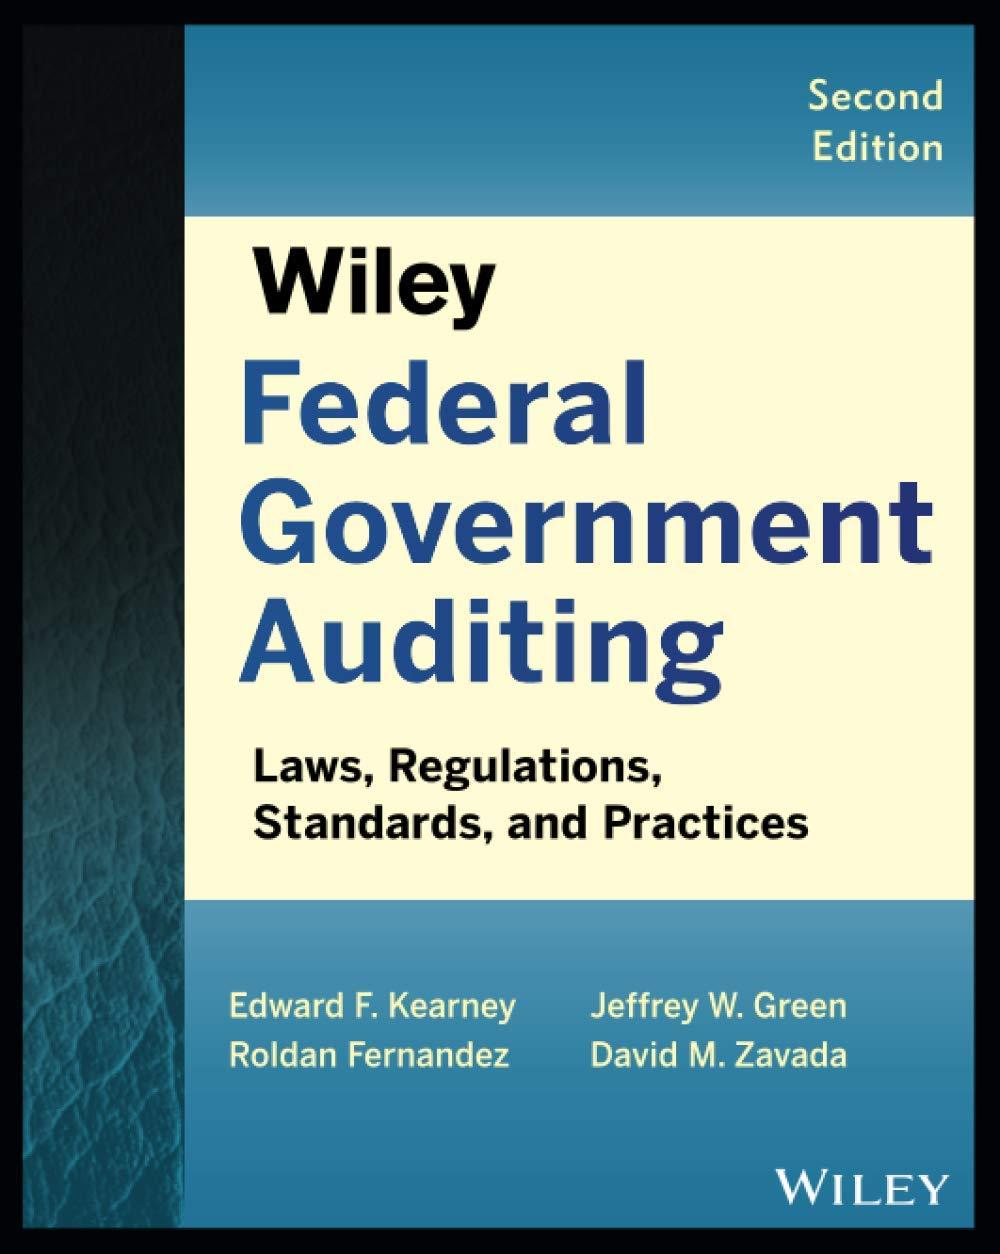 wiley federal government auditing laws regulations standards and practices 2nd edition edward f. kearney,